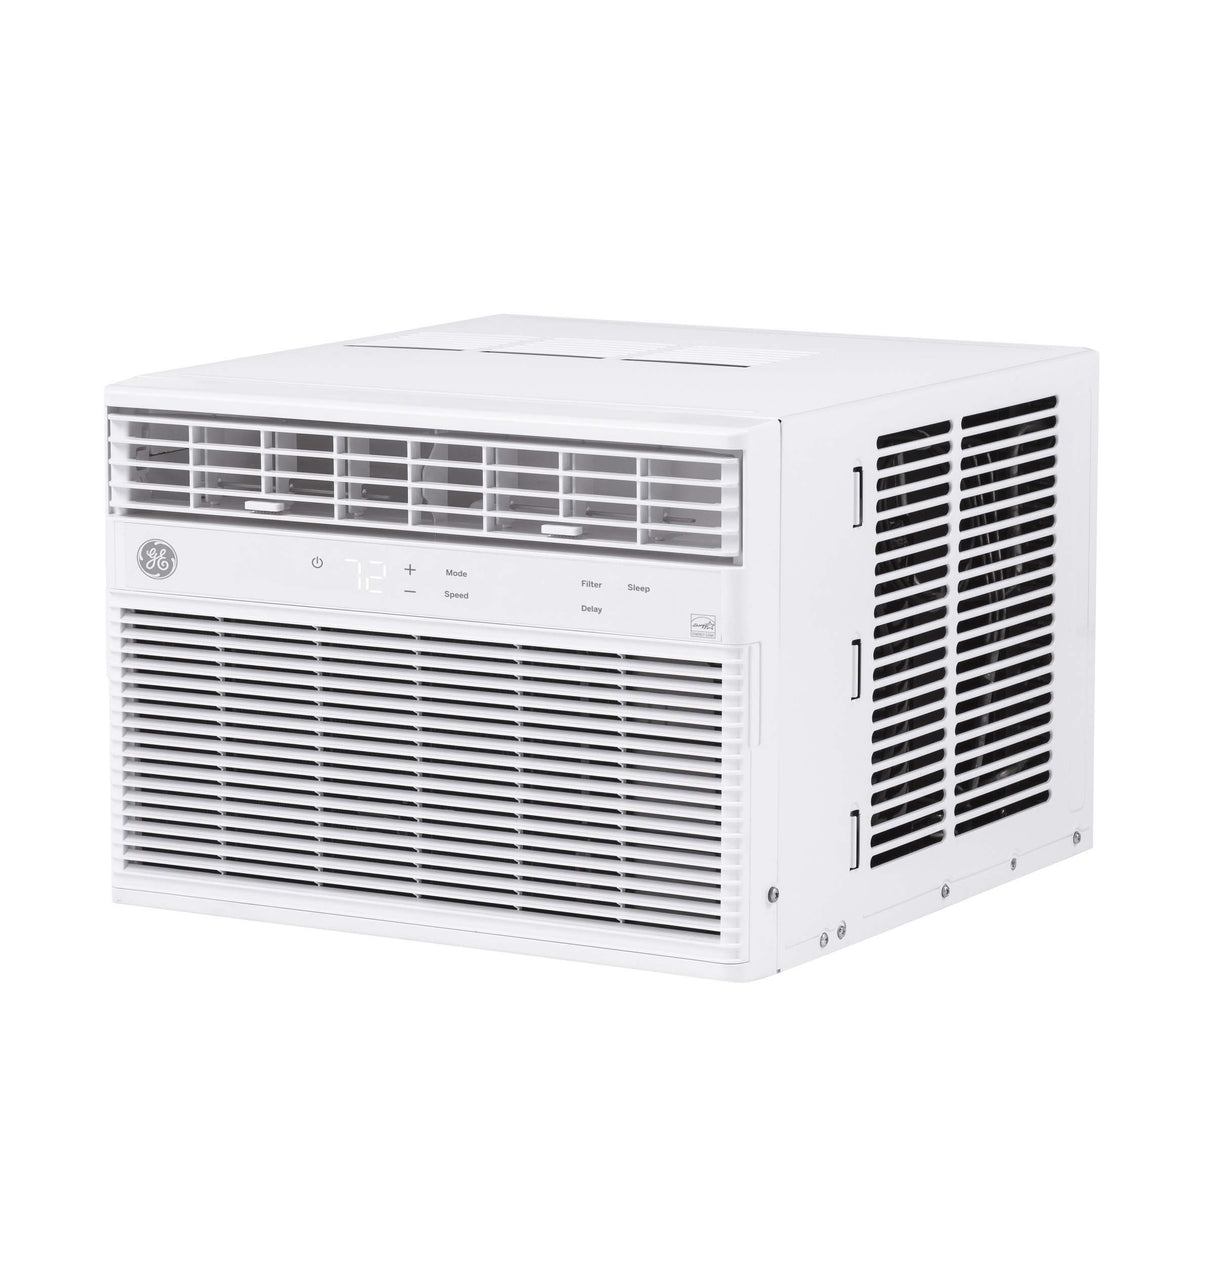 GE(R) 18,000 BTU Heat/Cool Electronic Window Air Conditioner for Extra-Large Rooms up to 1000 sq. ft. - (AHE18DZ)